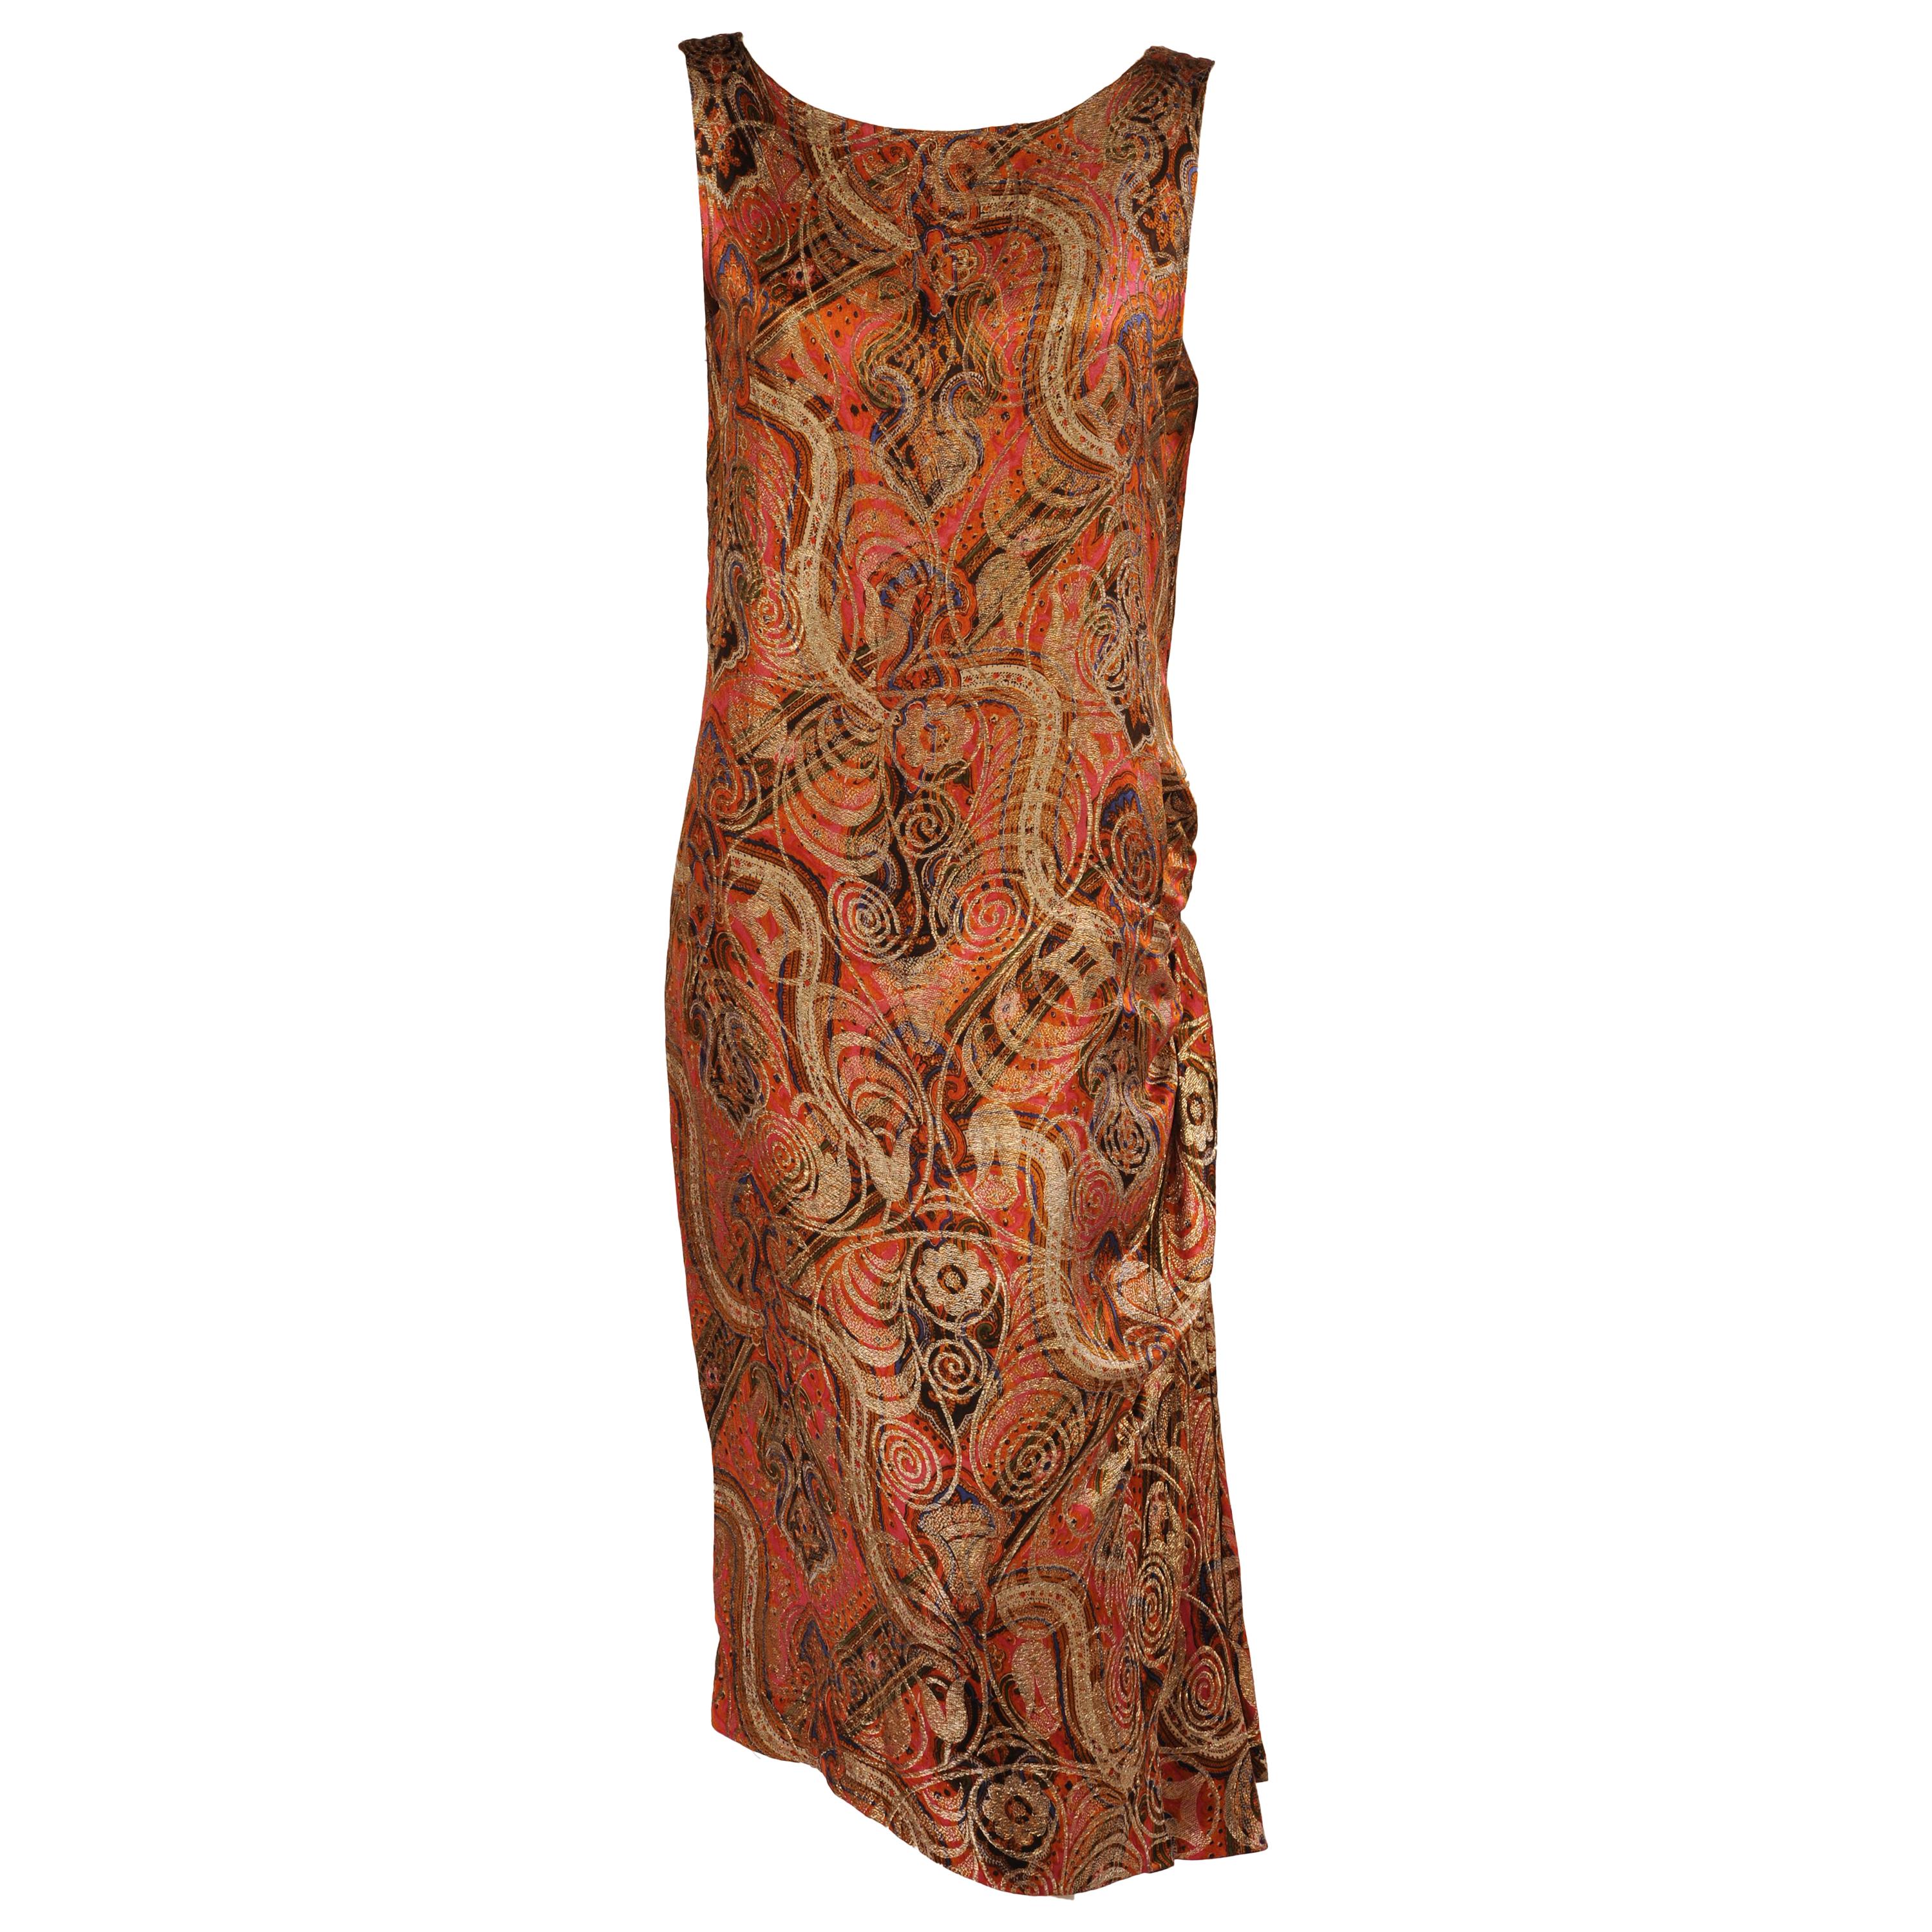 1920's Gold Lame Paisley Patterned Evening Dress